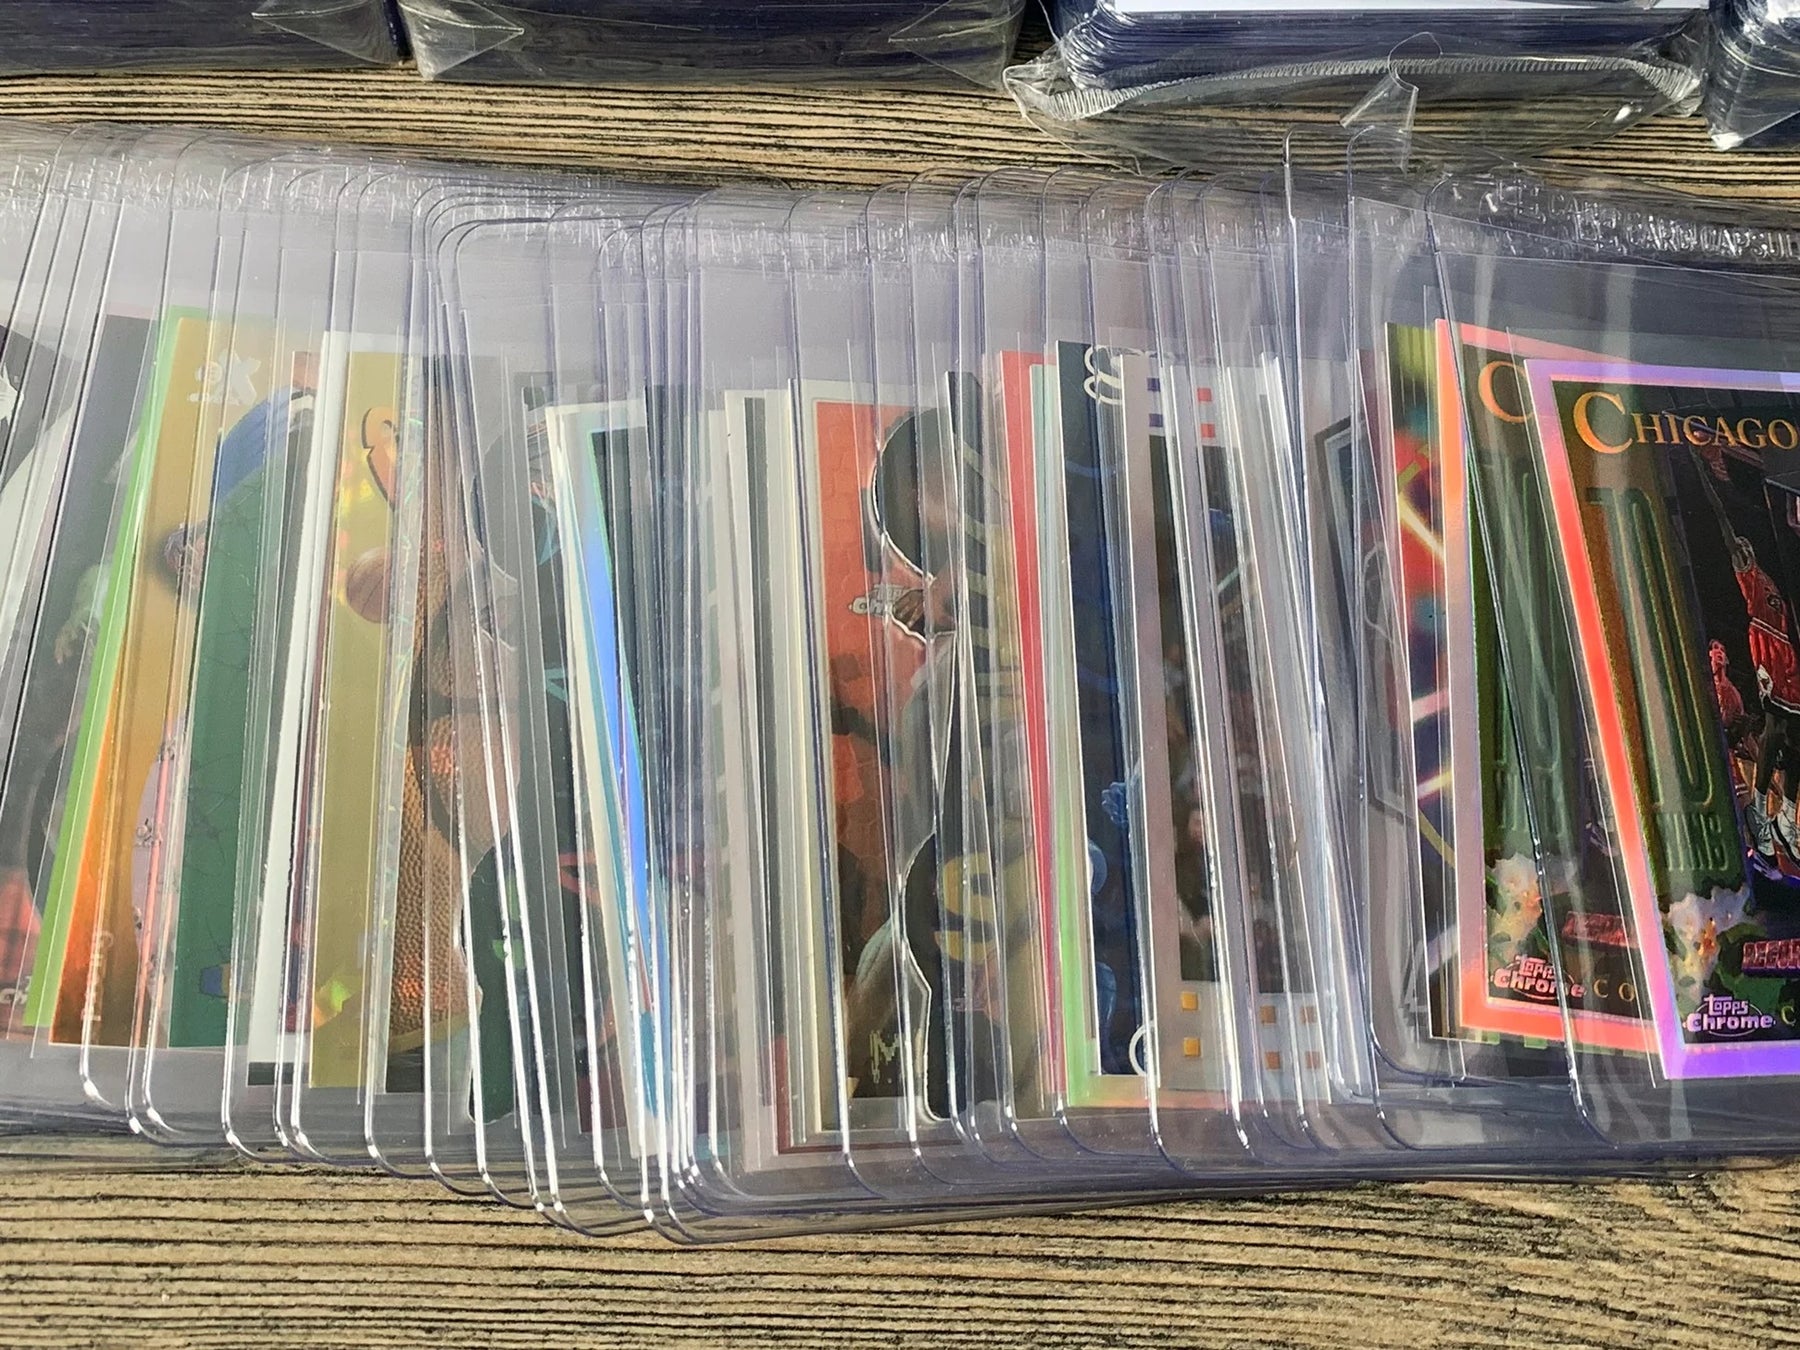 A collection of approximately 100 trading cards from the 1990s, including both insert and refractor cards, displayed in a fanned-out arrangement on a table. Each card is securely housed in either a Card Saver 1 holder or a Card Capsule semi-rigid holder